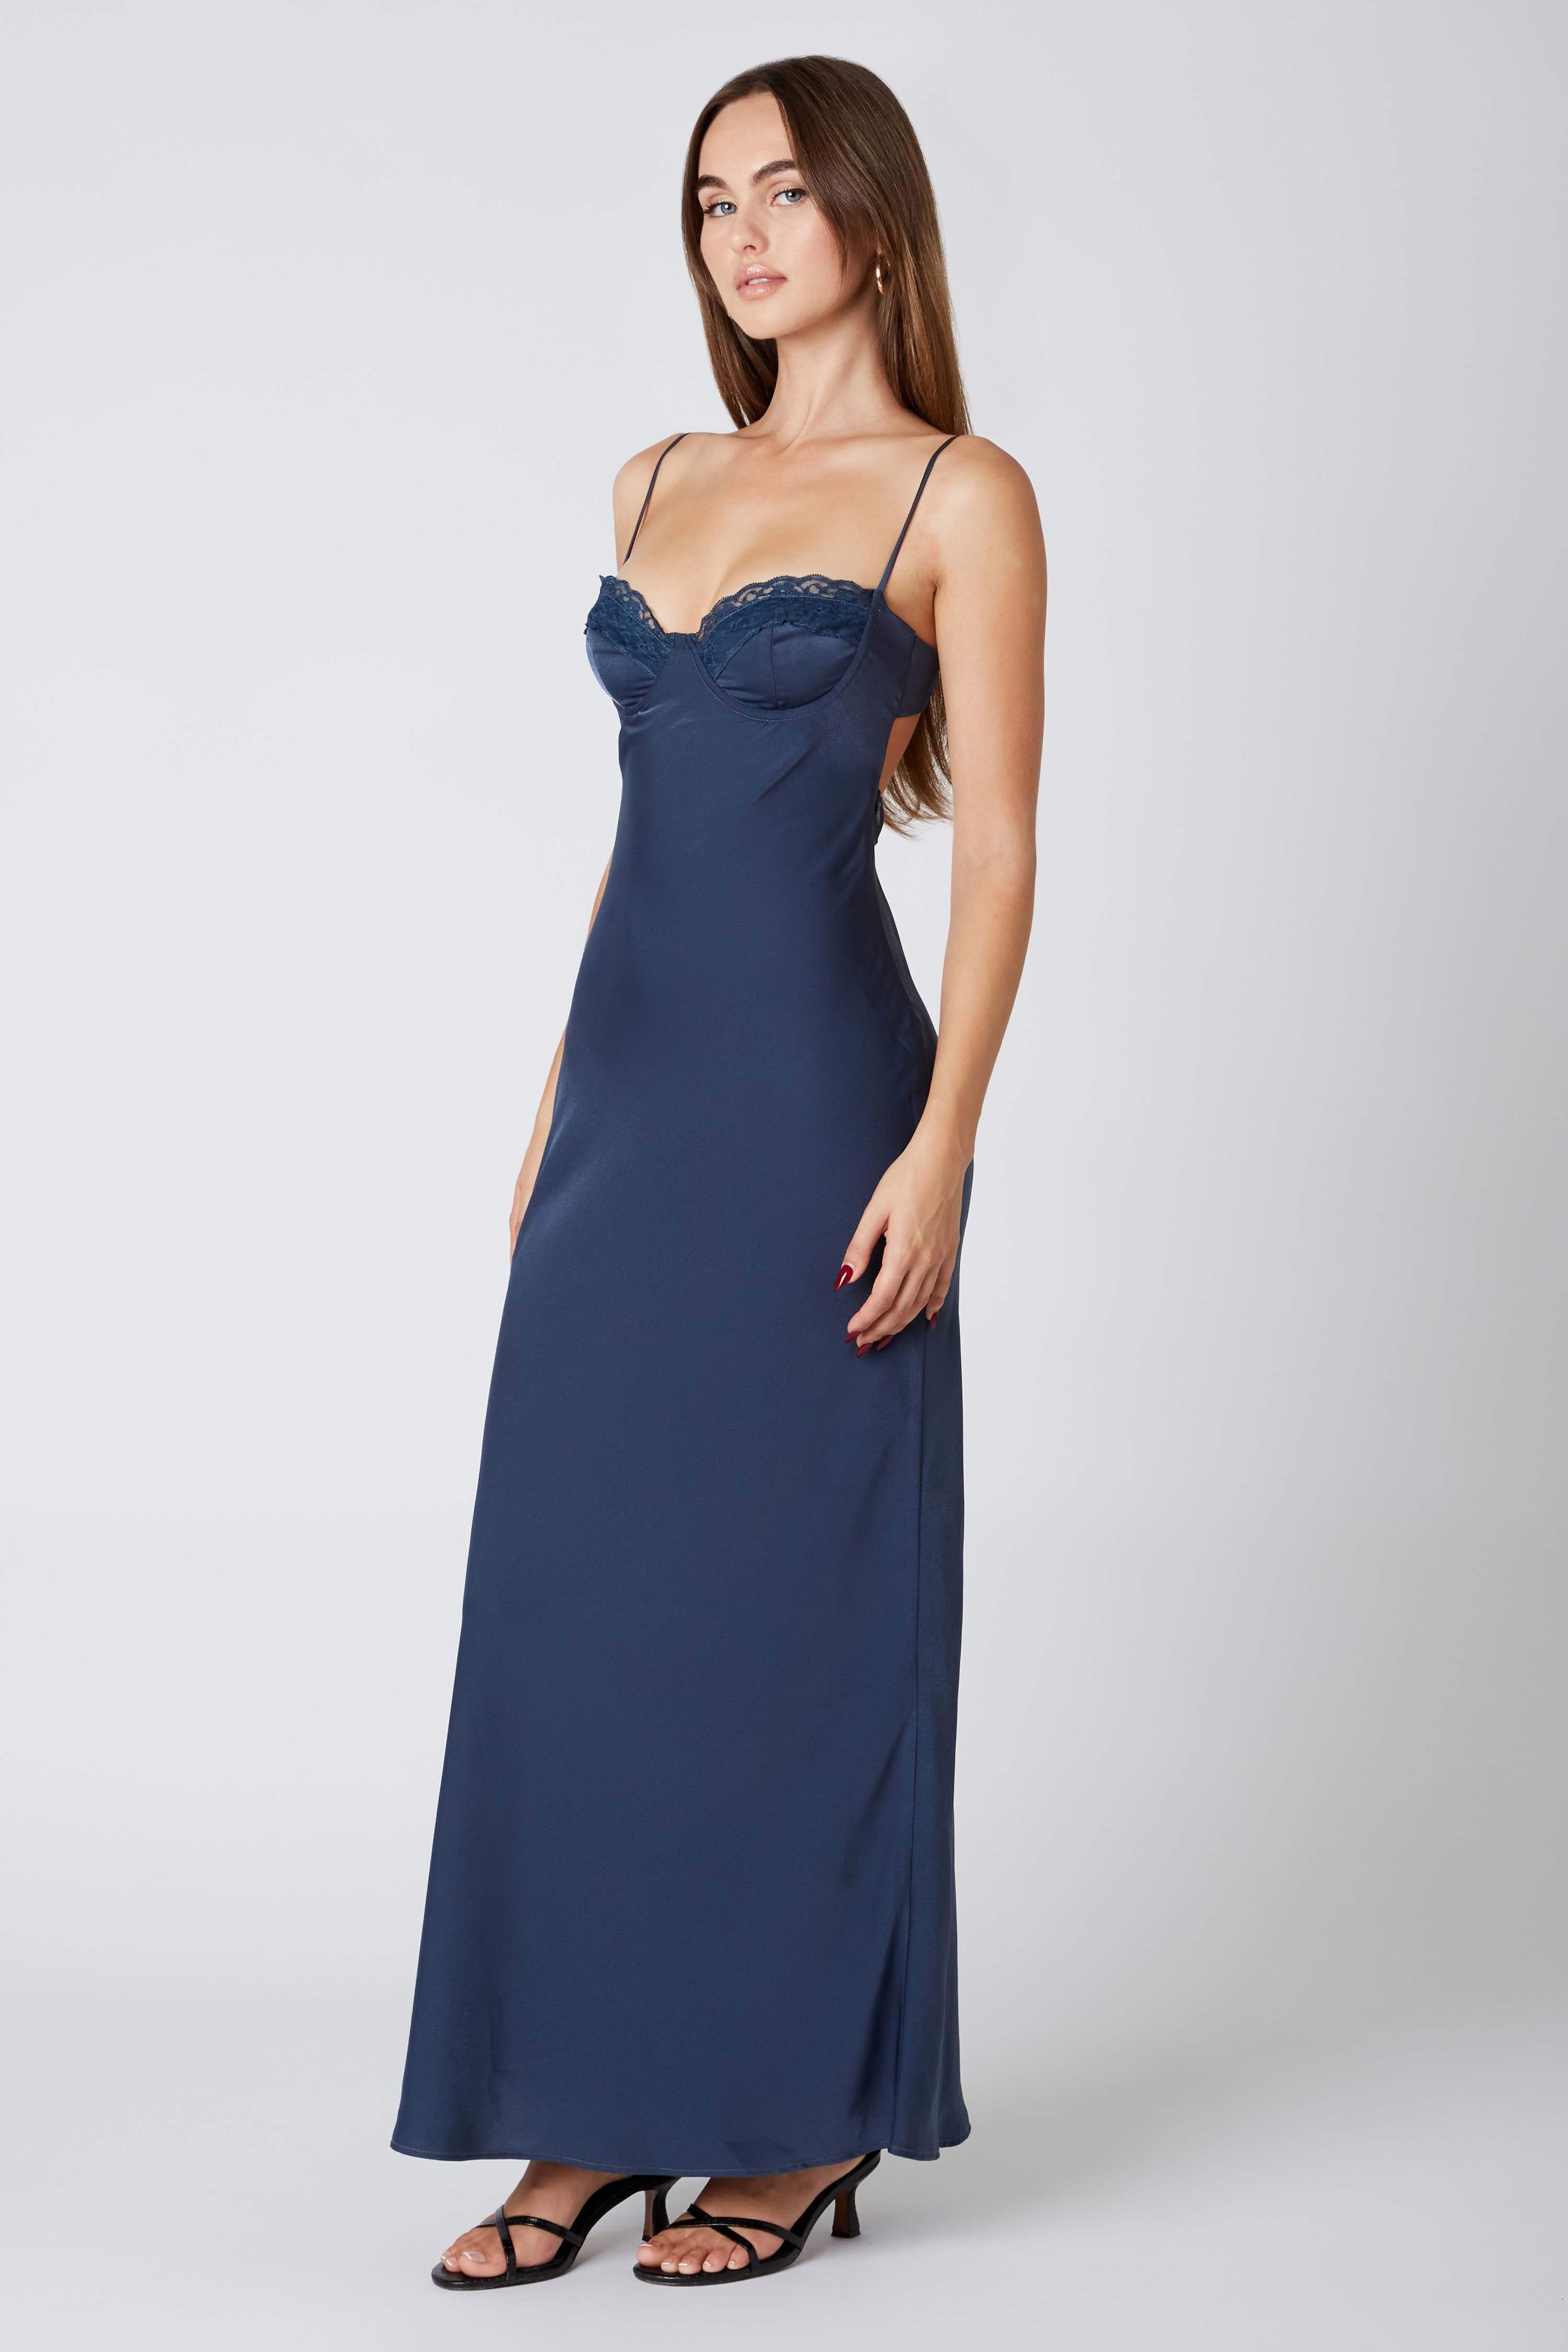 Corset Maxi Dress in Dusk Side View